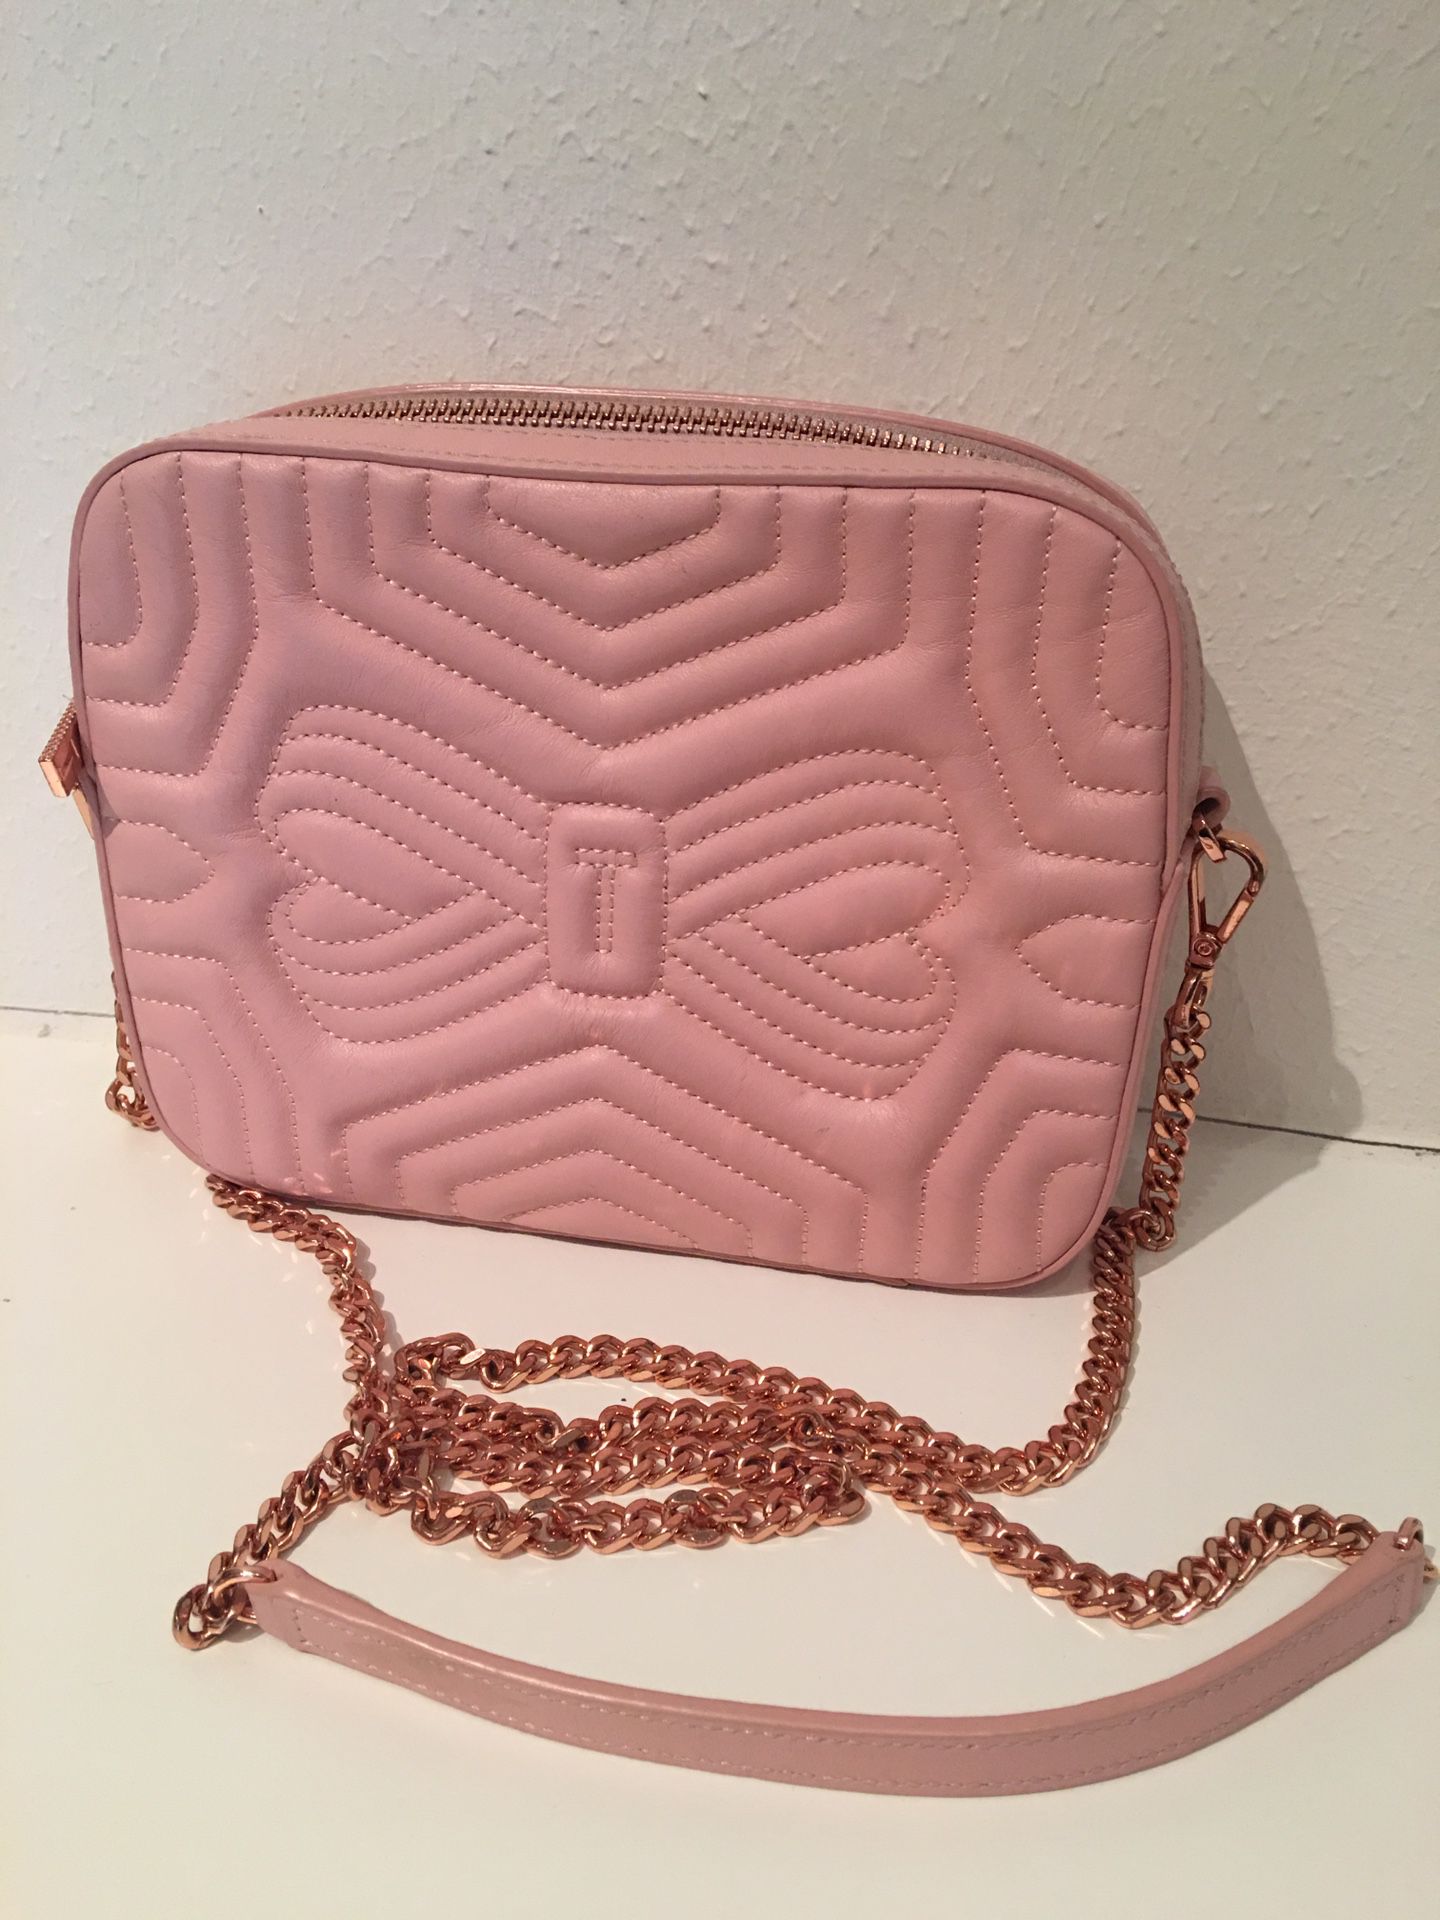 Ted Baker pink crossbody with rose gold metal chain